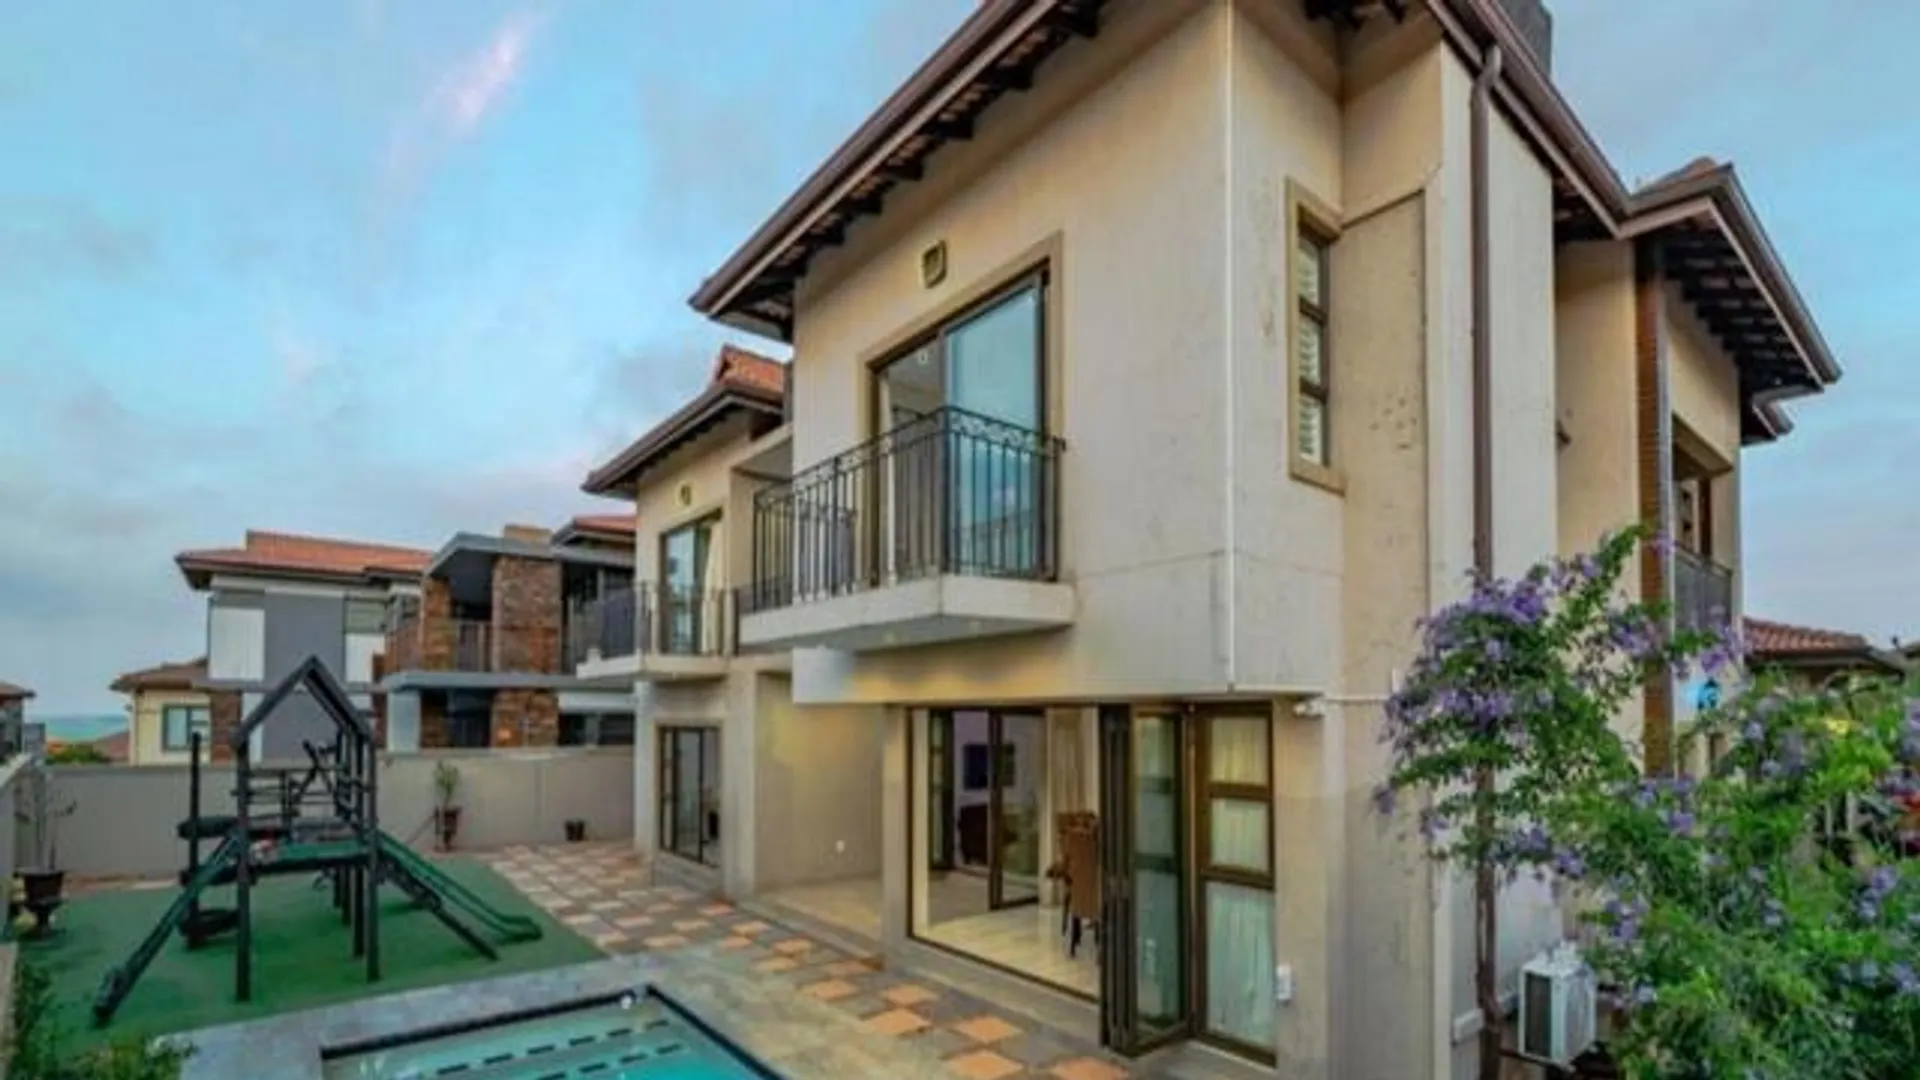 Chartwell Drive, Westridge, Umhlanga, 4320, South Africa | 4-bed house ...